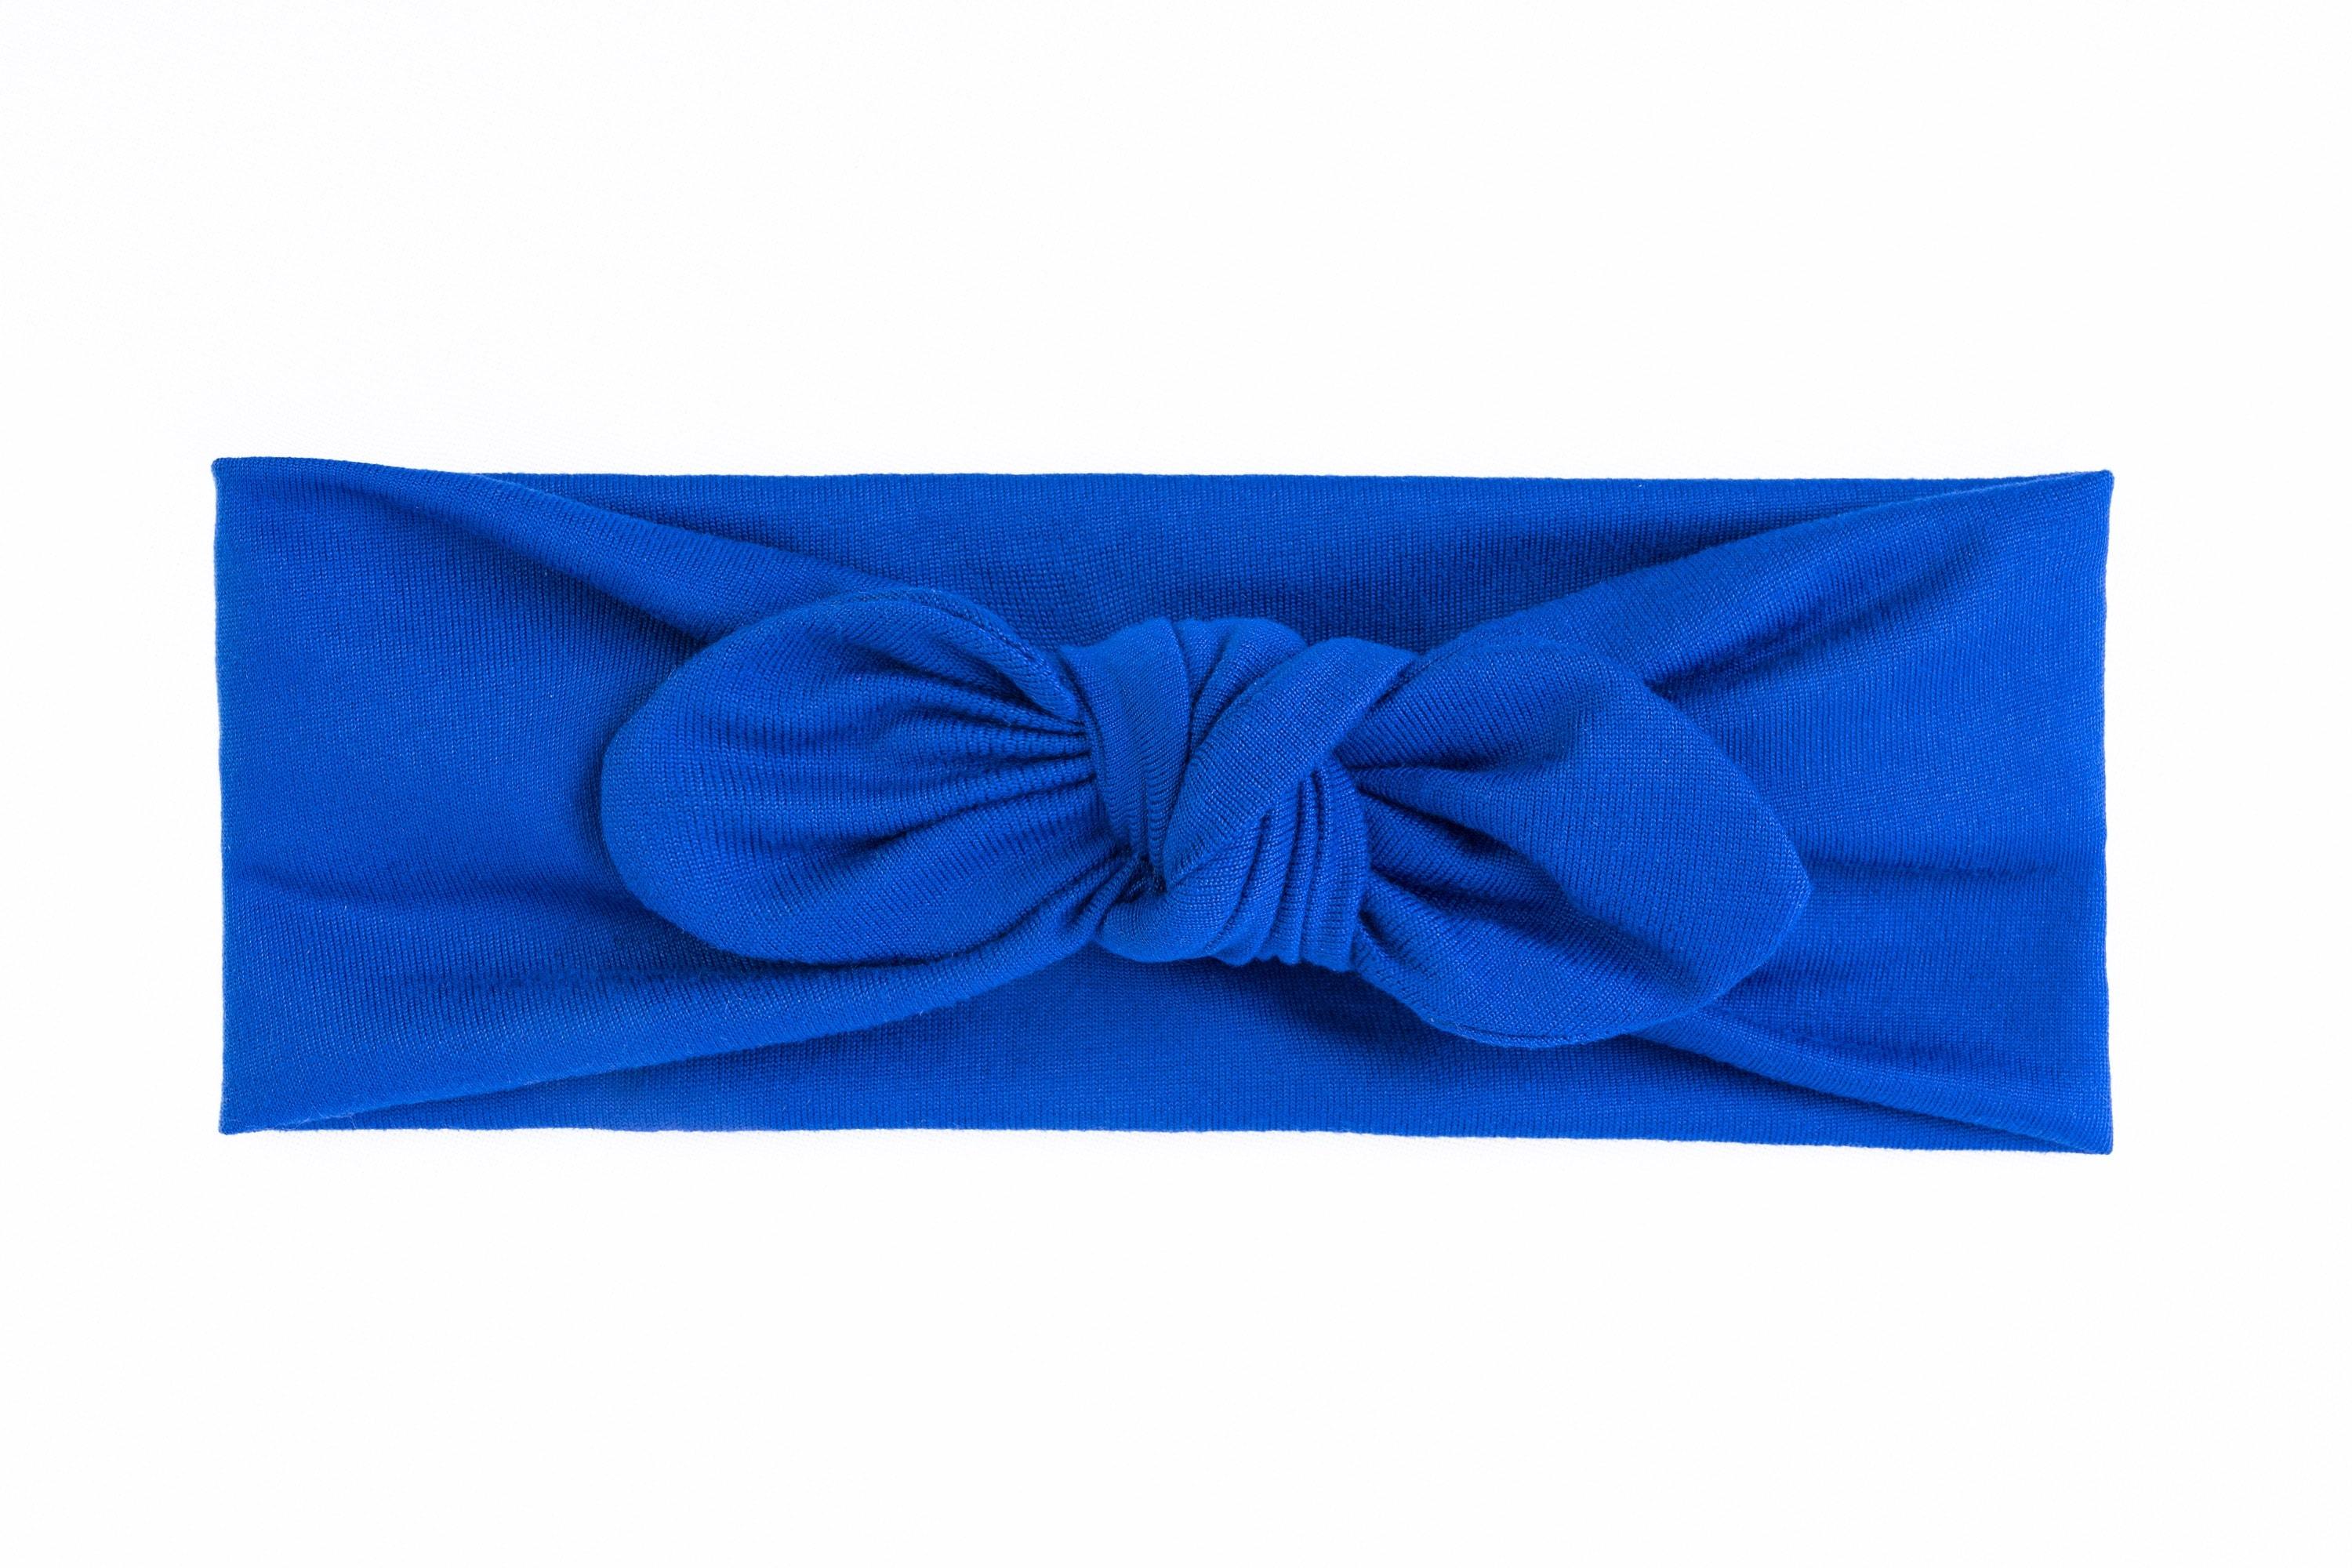 Handmade blue knotted headband for little girls from By Bella Boutique.